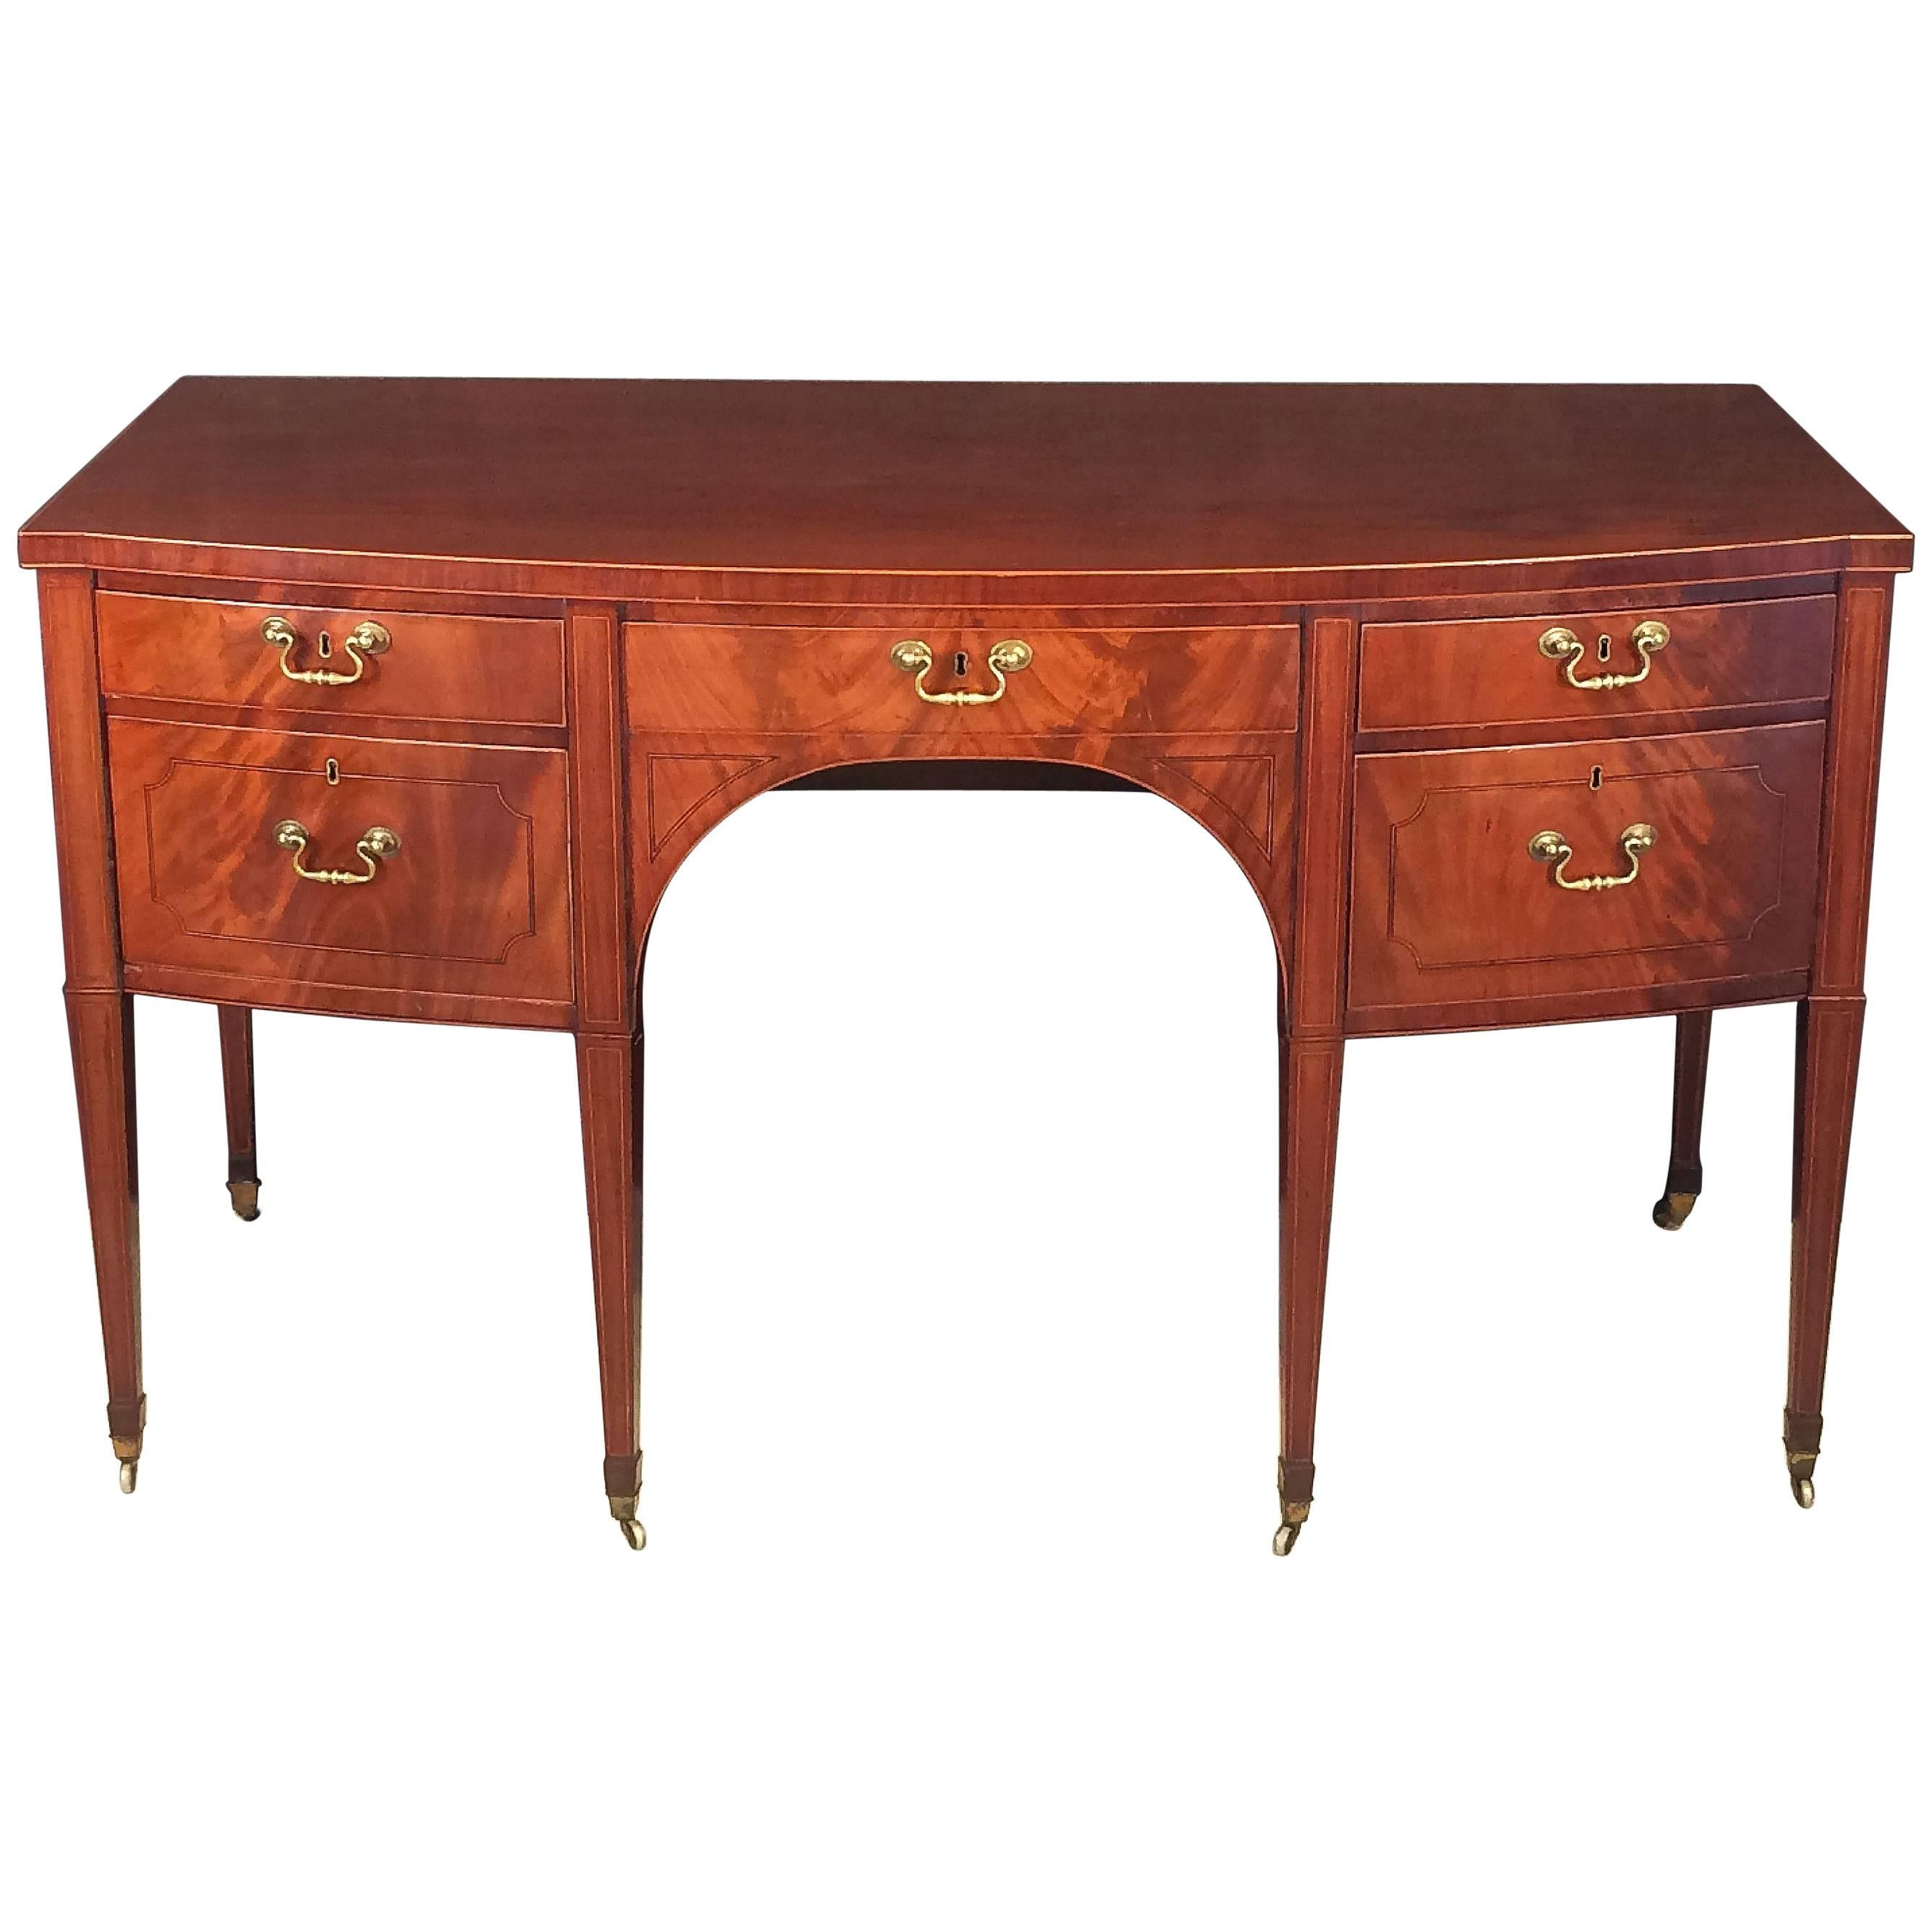 English Sideboard Console of Inlaid Flame Mahogany from the Regency Period For Sale